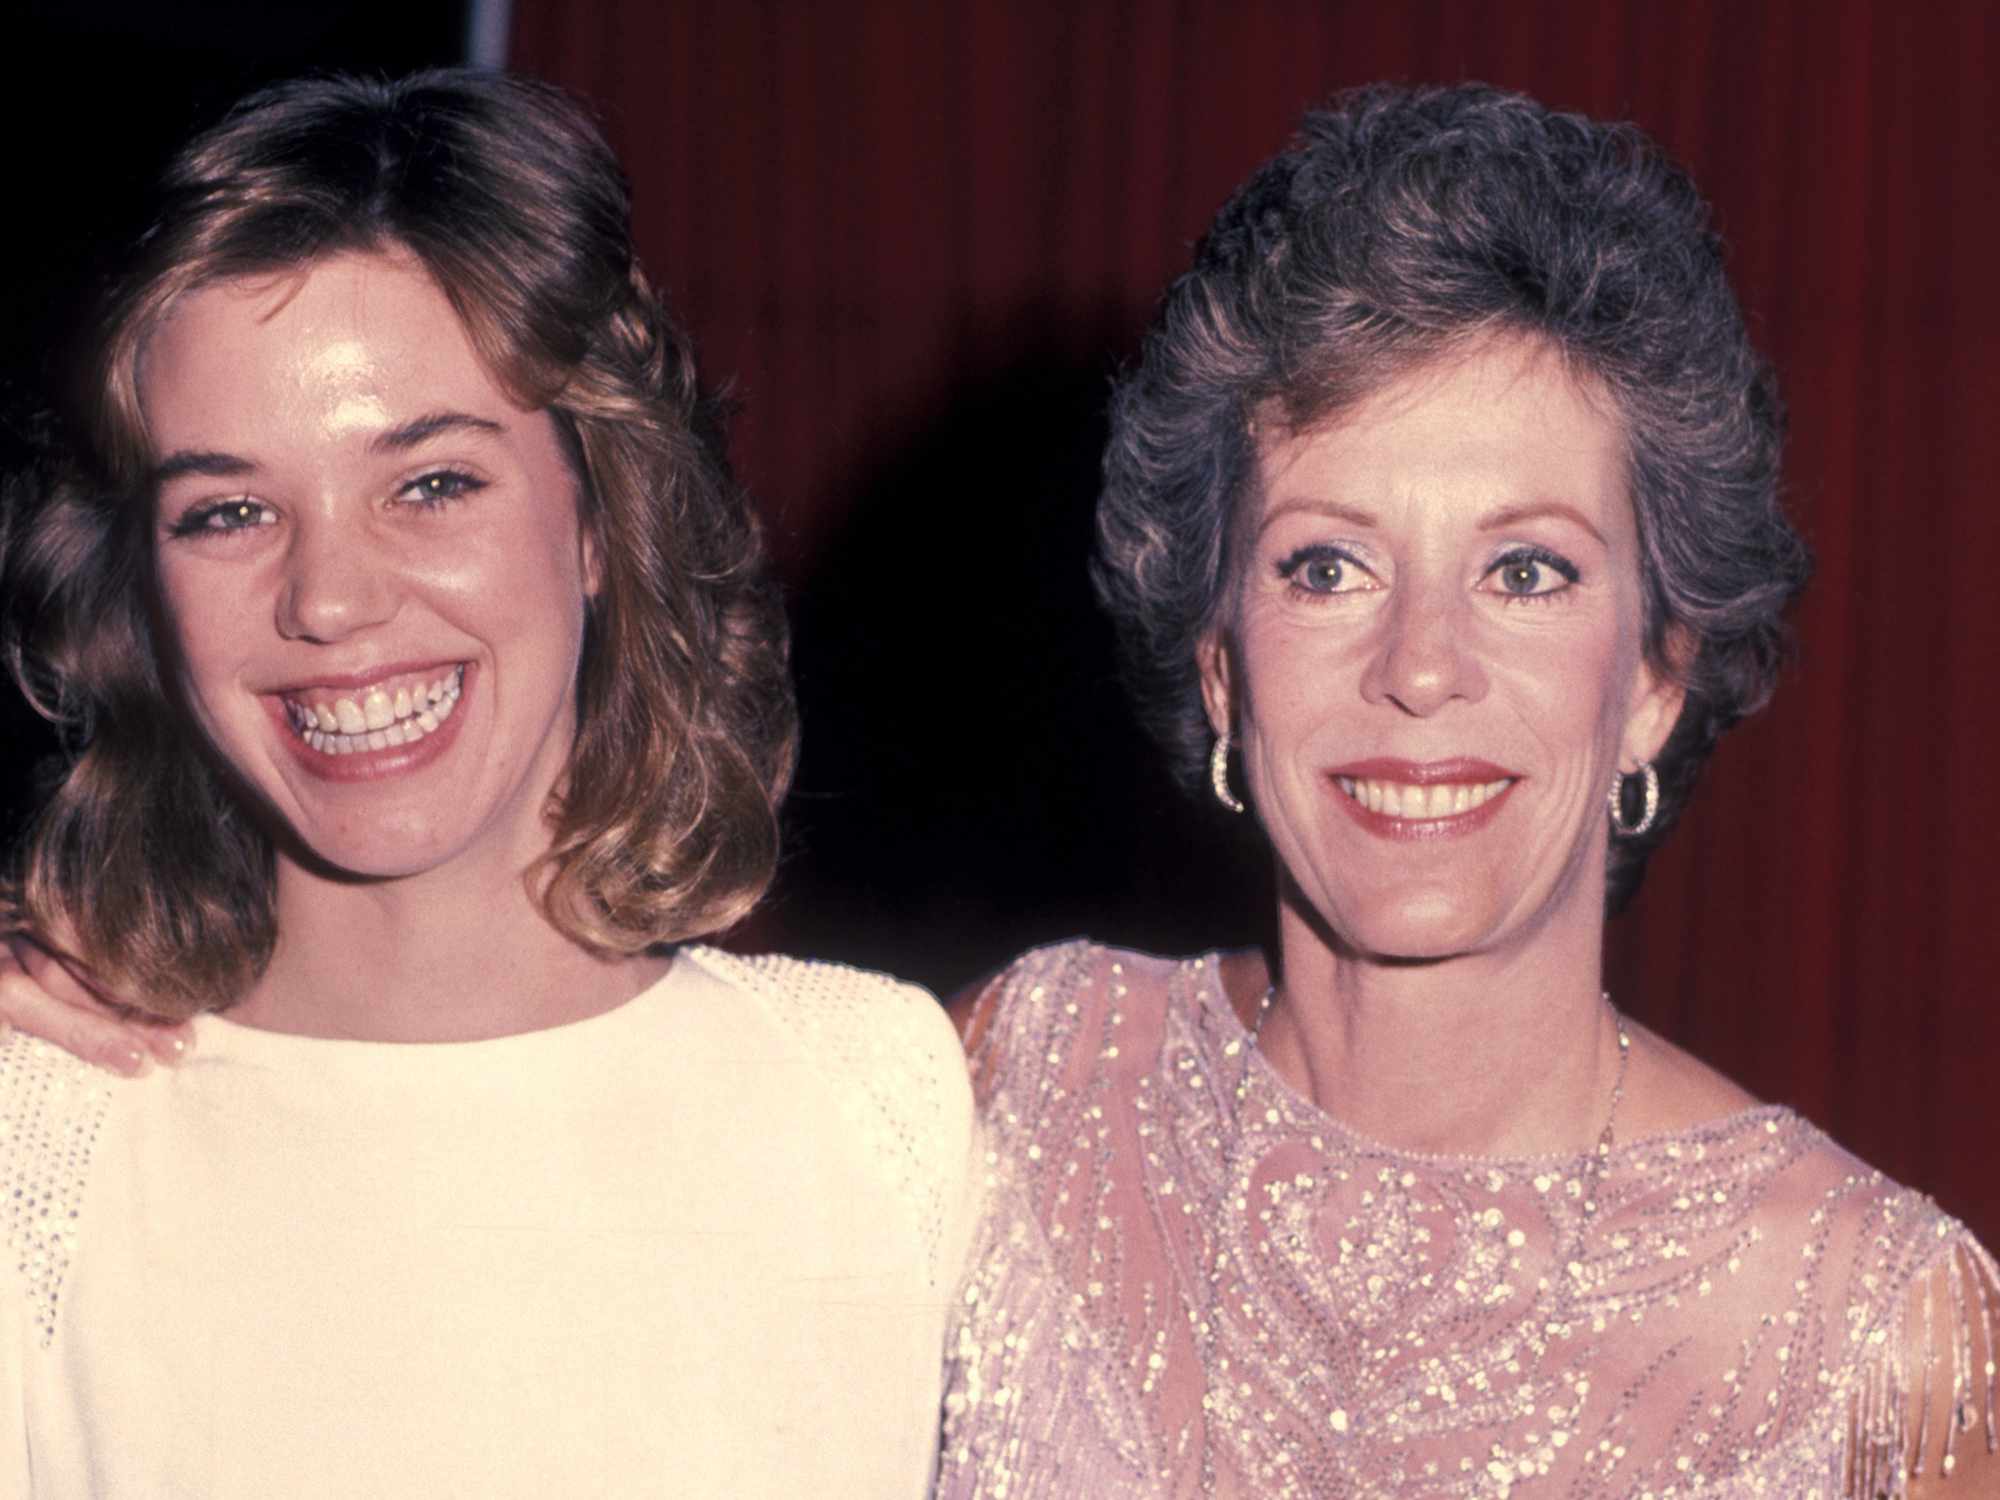 Carrie Hamilton and Carol Burnett during Kennedy Center Honors - January 1, 1983 at Kennedy Center in Washington D.C., Washington D.C., United States